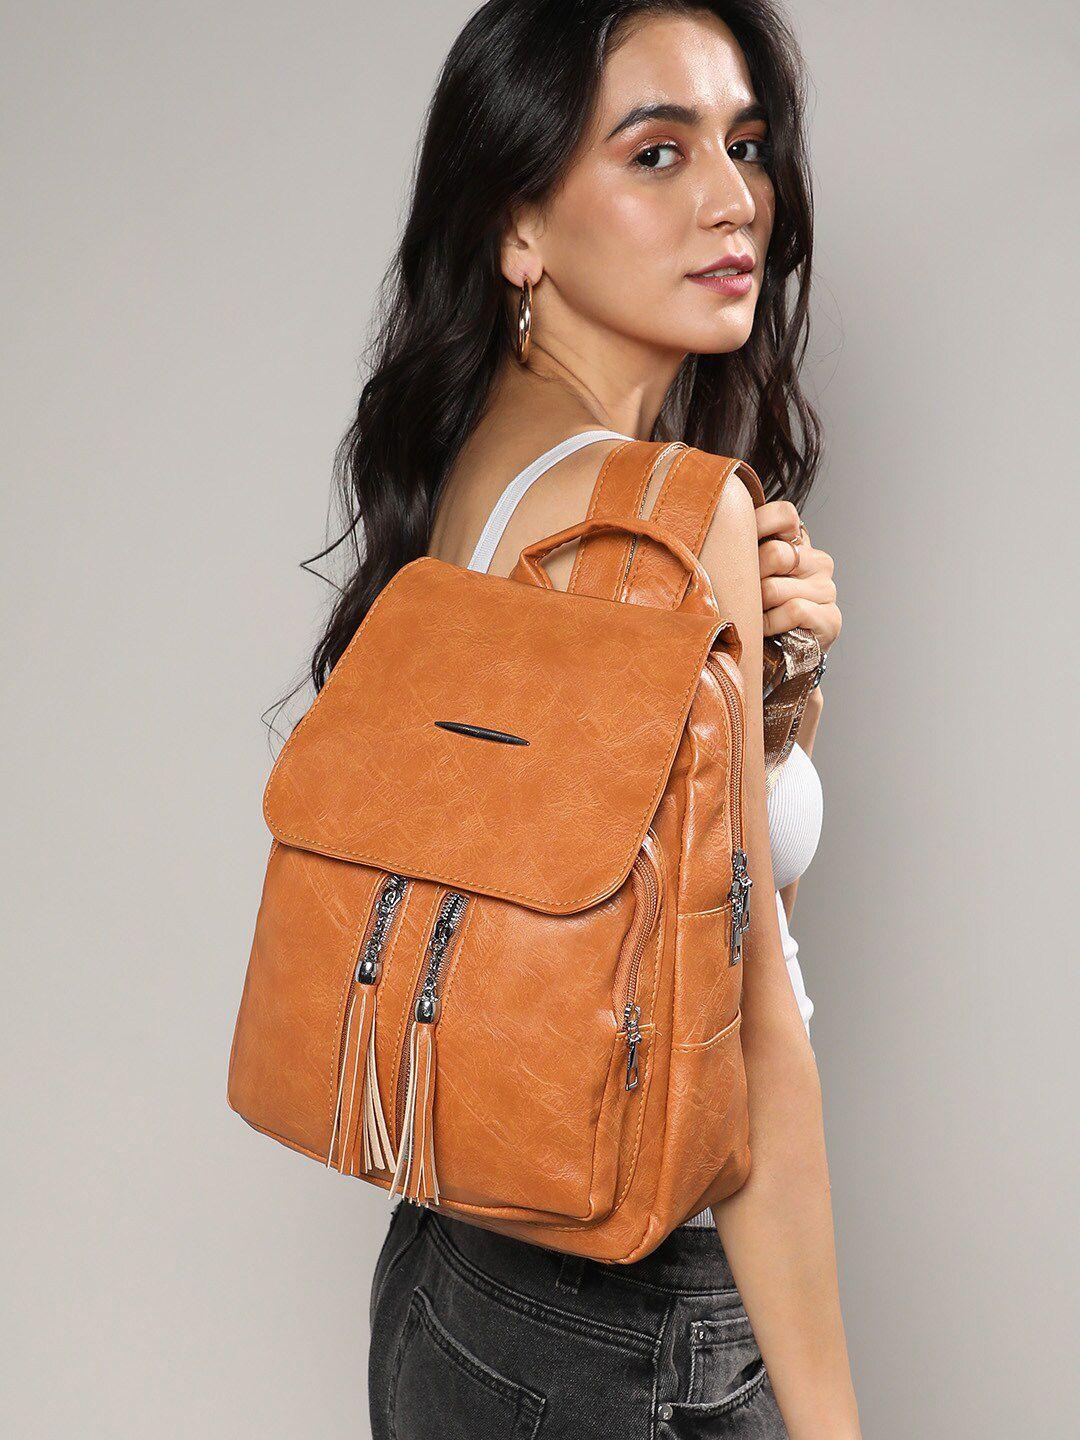 haute sauce by campus sutra women brown backpack